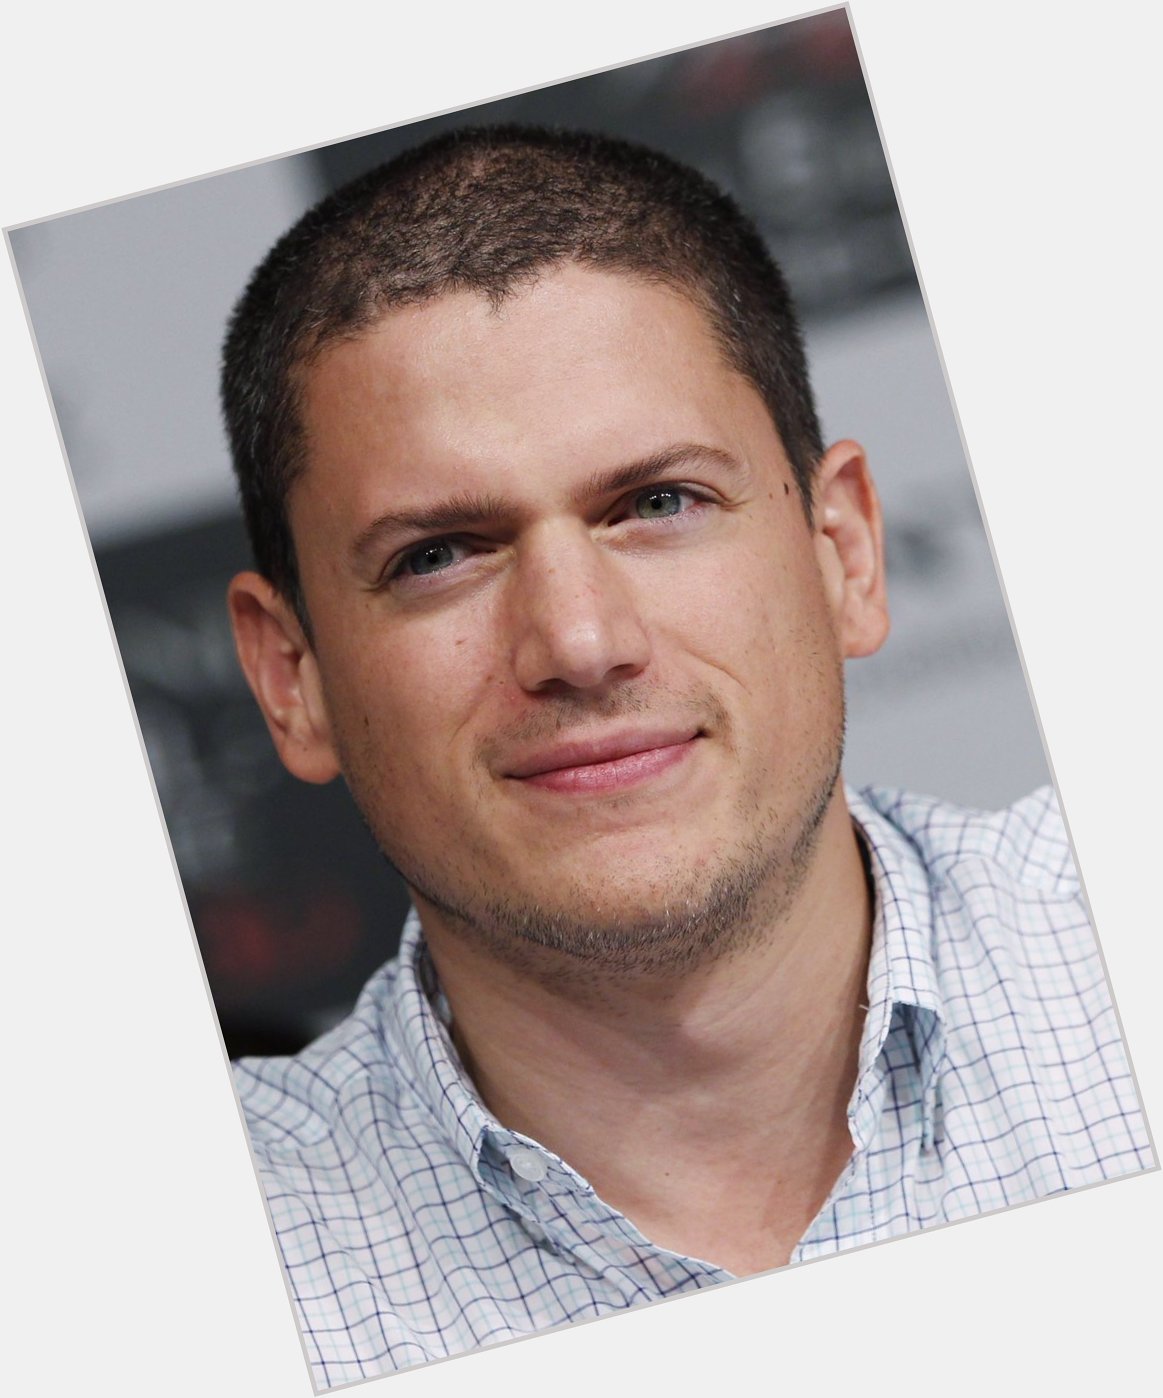 Happy birthday to our lovely Wentworth Miller 